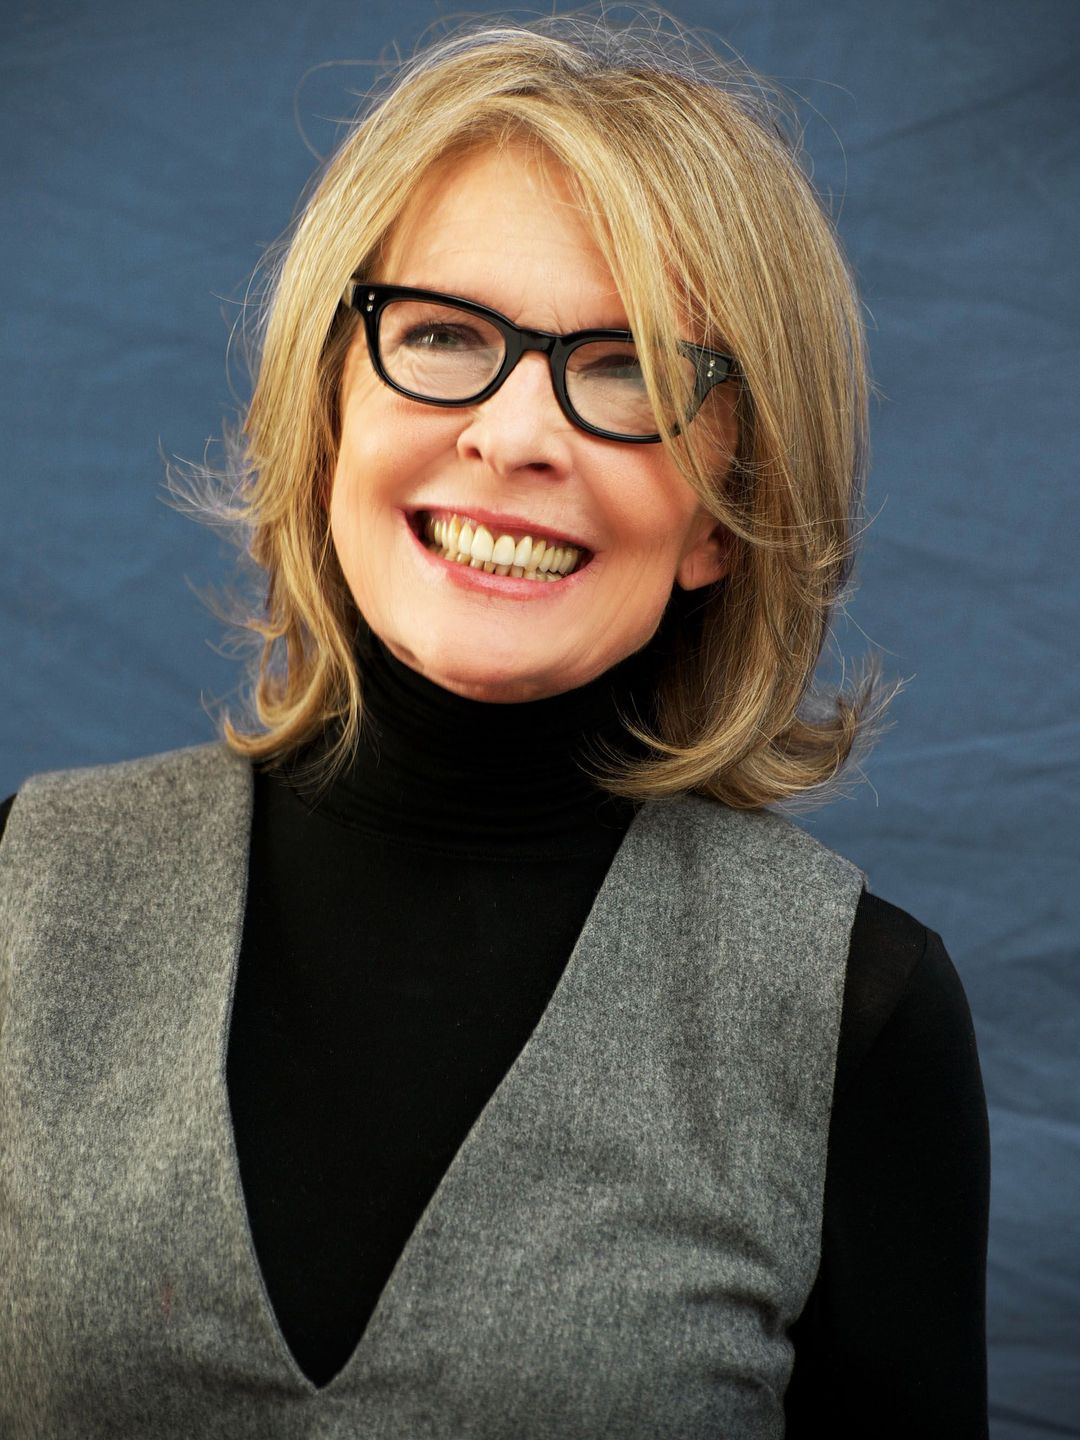 Diane Keaton who is her father